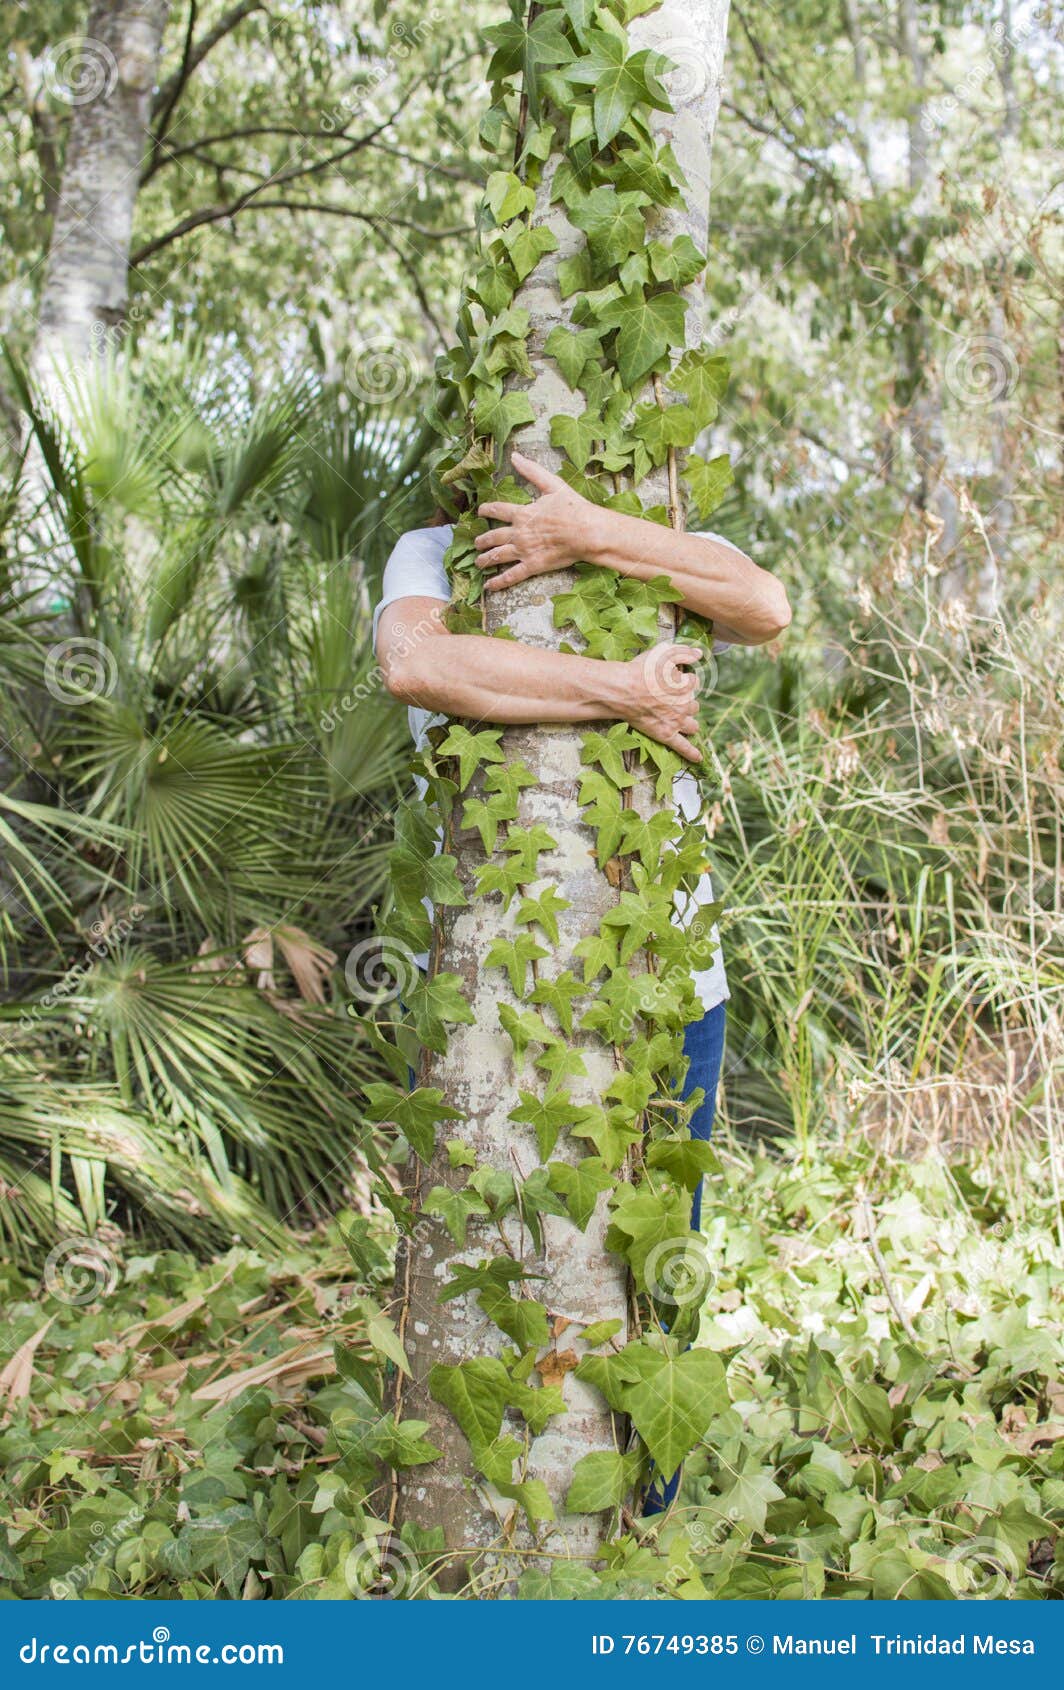 Person hugging tree stock image. Image of hugging, forest - 76749385